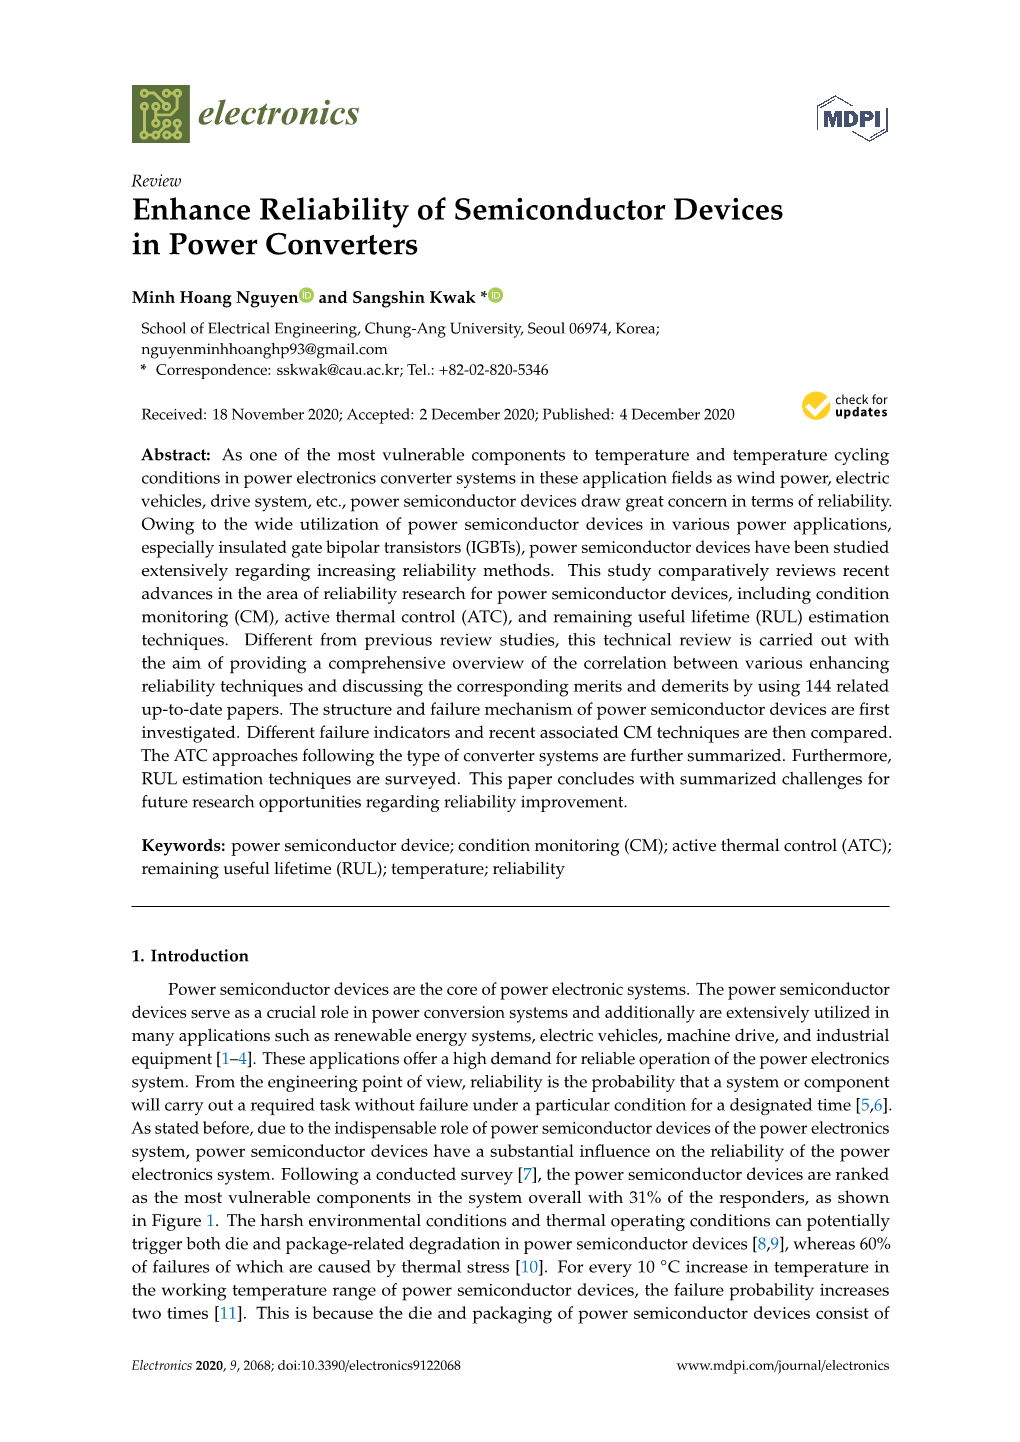 Enhance Reliability of Semiconductor Devices in Power Converters